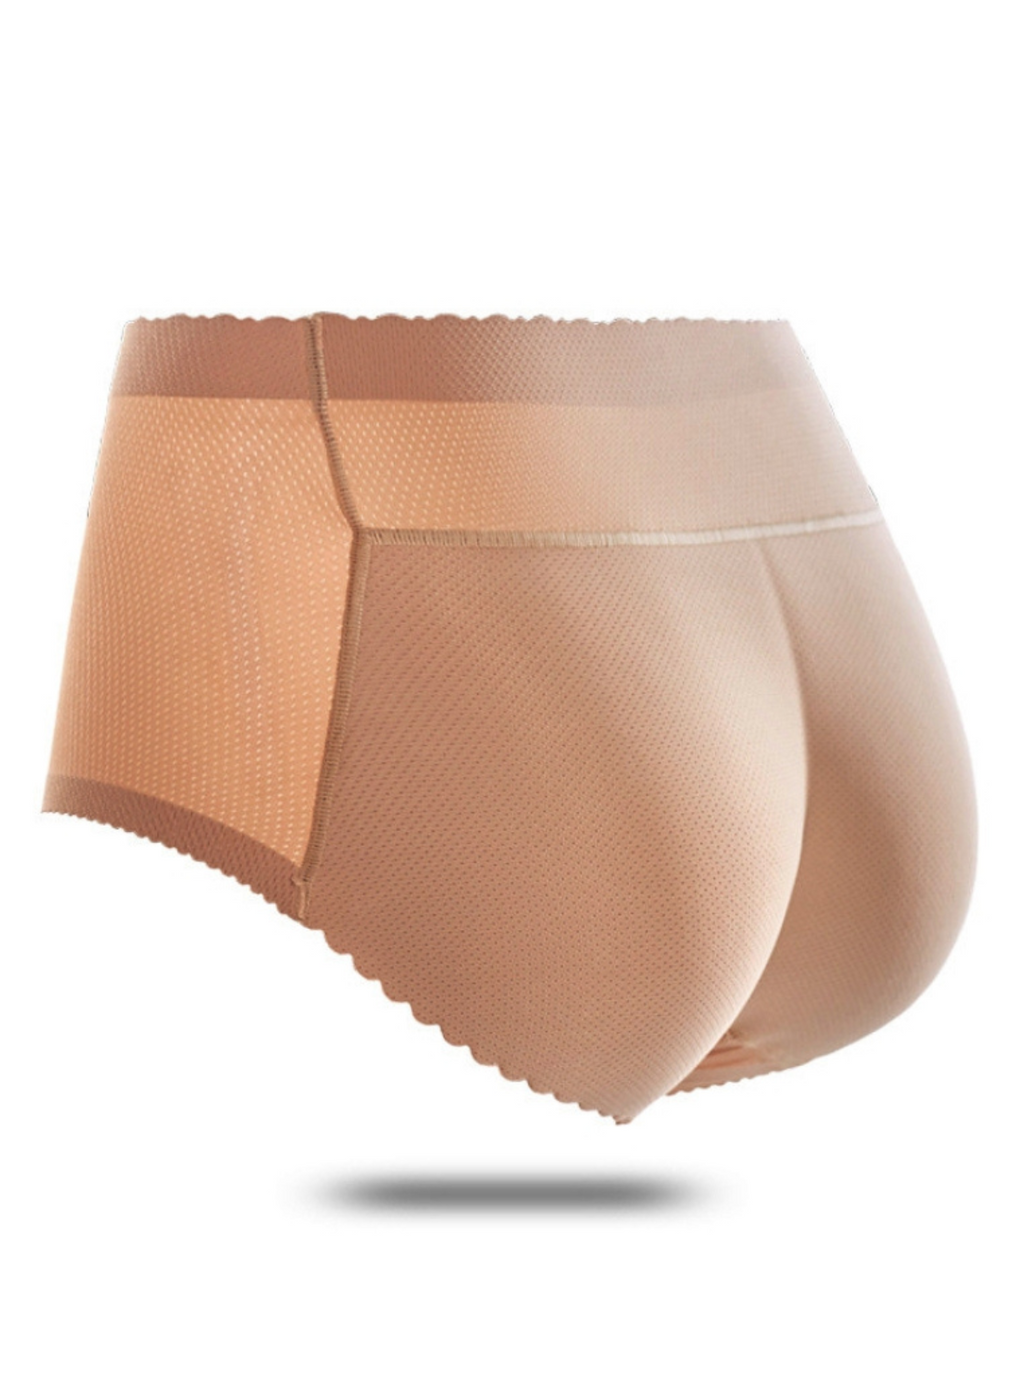 Buy Kiss & Tell 2 Pack Kleo Butt Lifter Safety Shorts Panties Seamless Padded  Underwear Hip Pads Enhancer Panty in Nude and Black in Nude Black 2024  Online